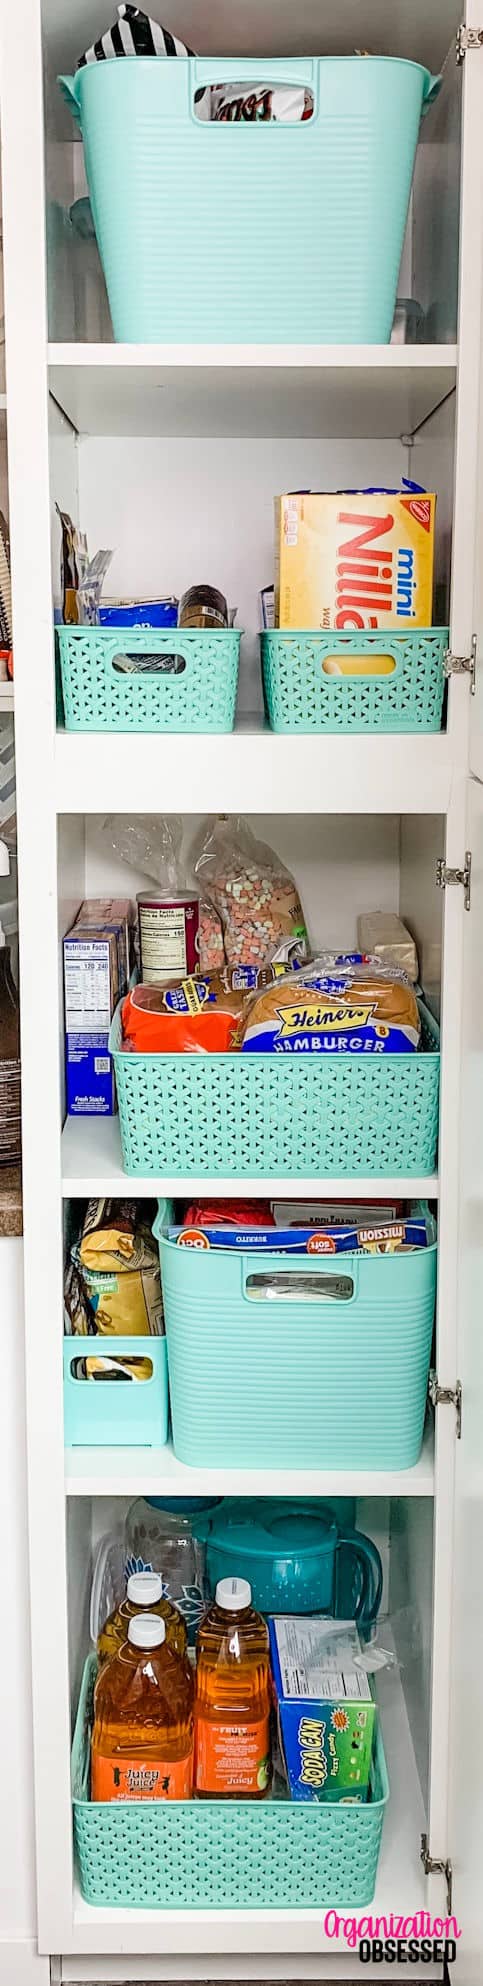 Organizing a Small Pantry Cabinet - Organization Obsessed